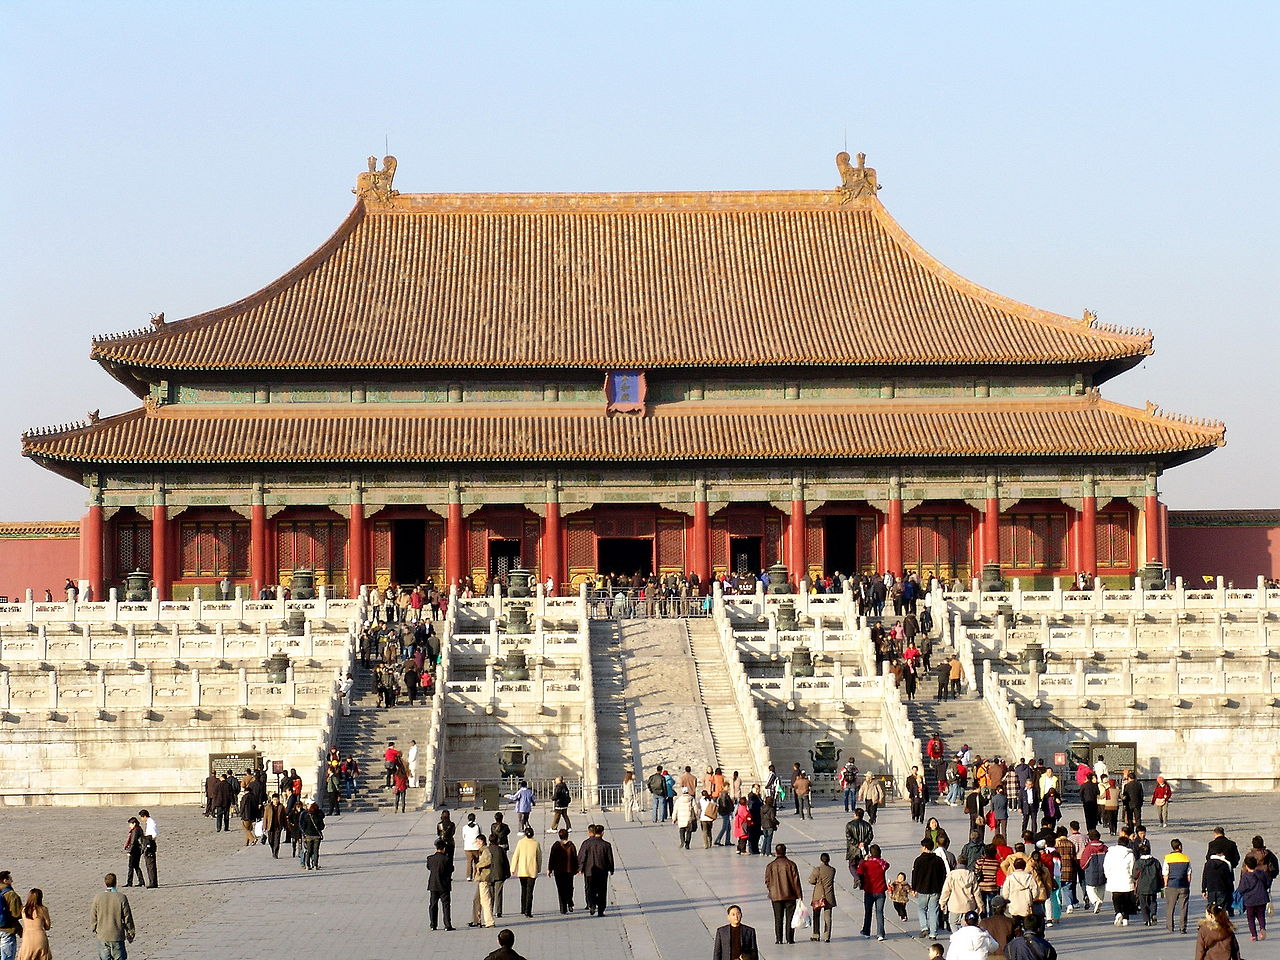 The Forbidden City at the center of Beijing, China. (Photo by Saad Akhtar / Source: Wikimedia Commons)